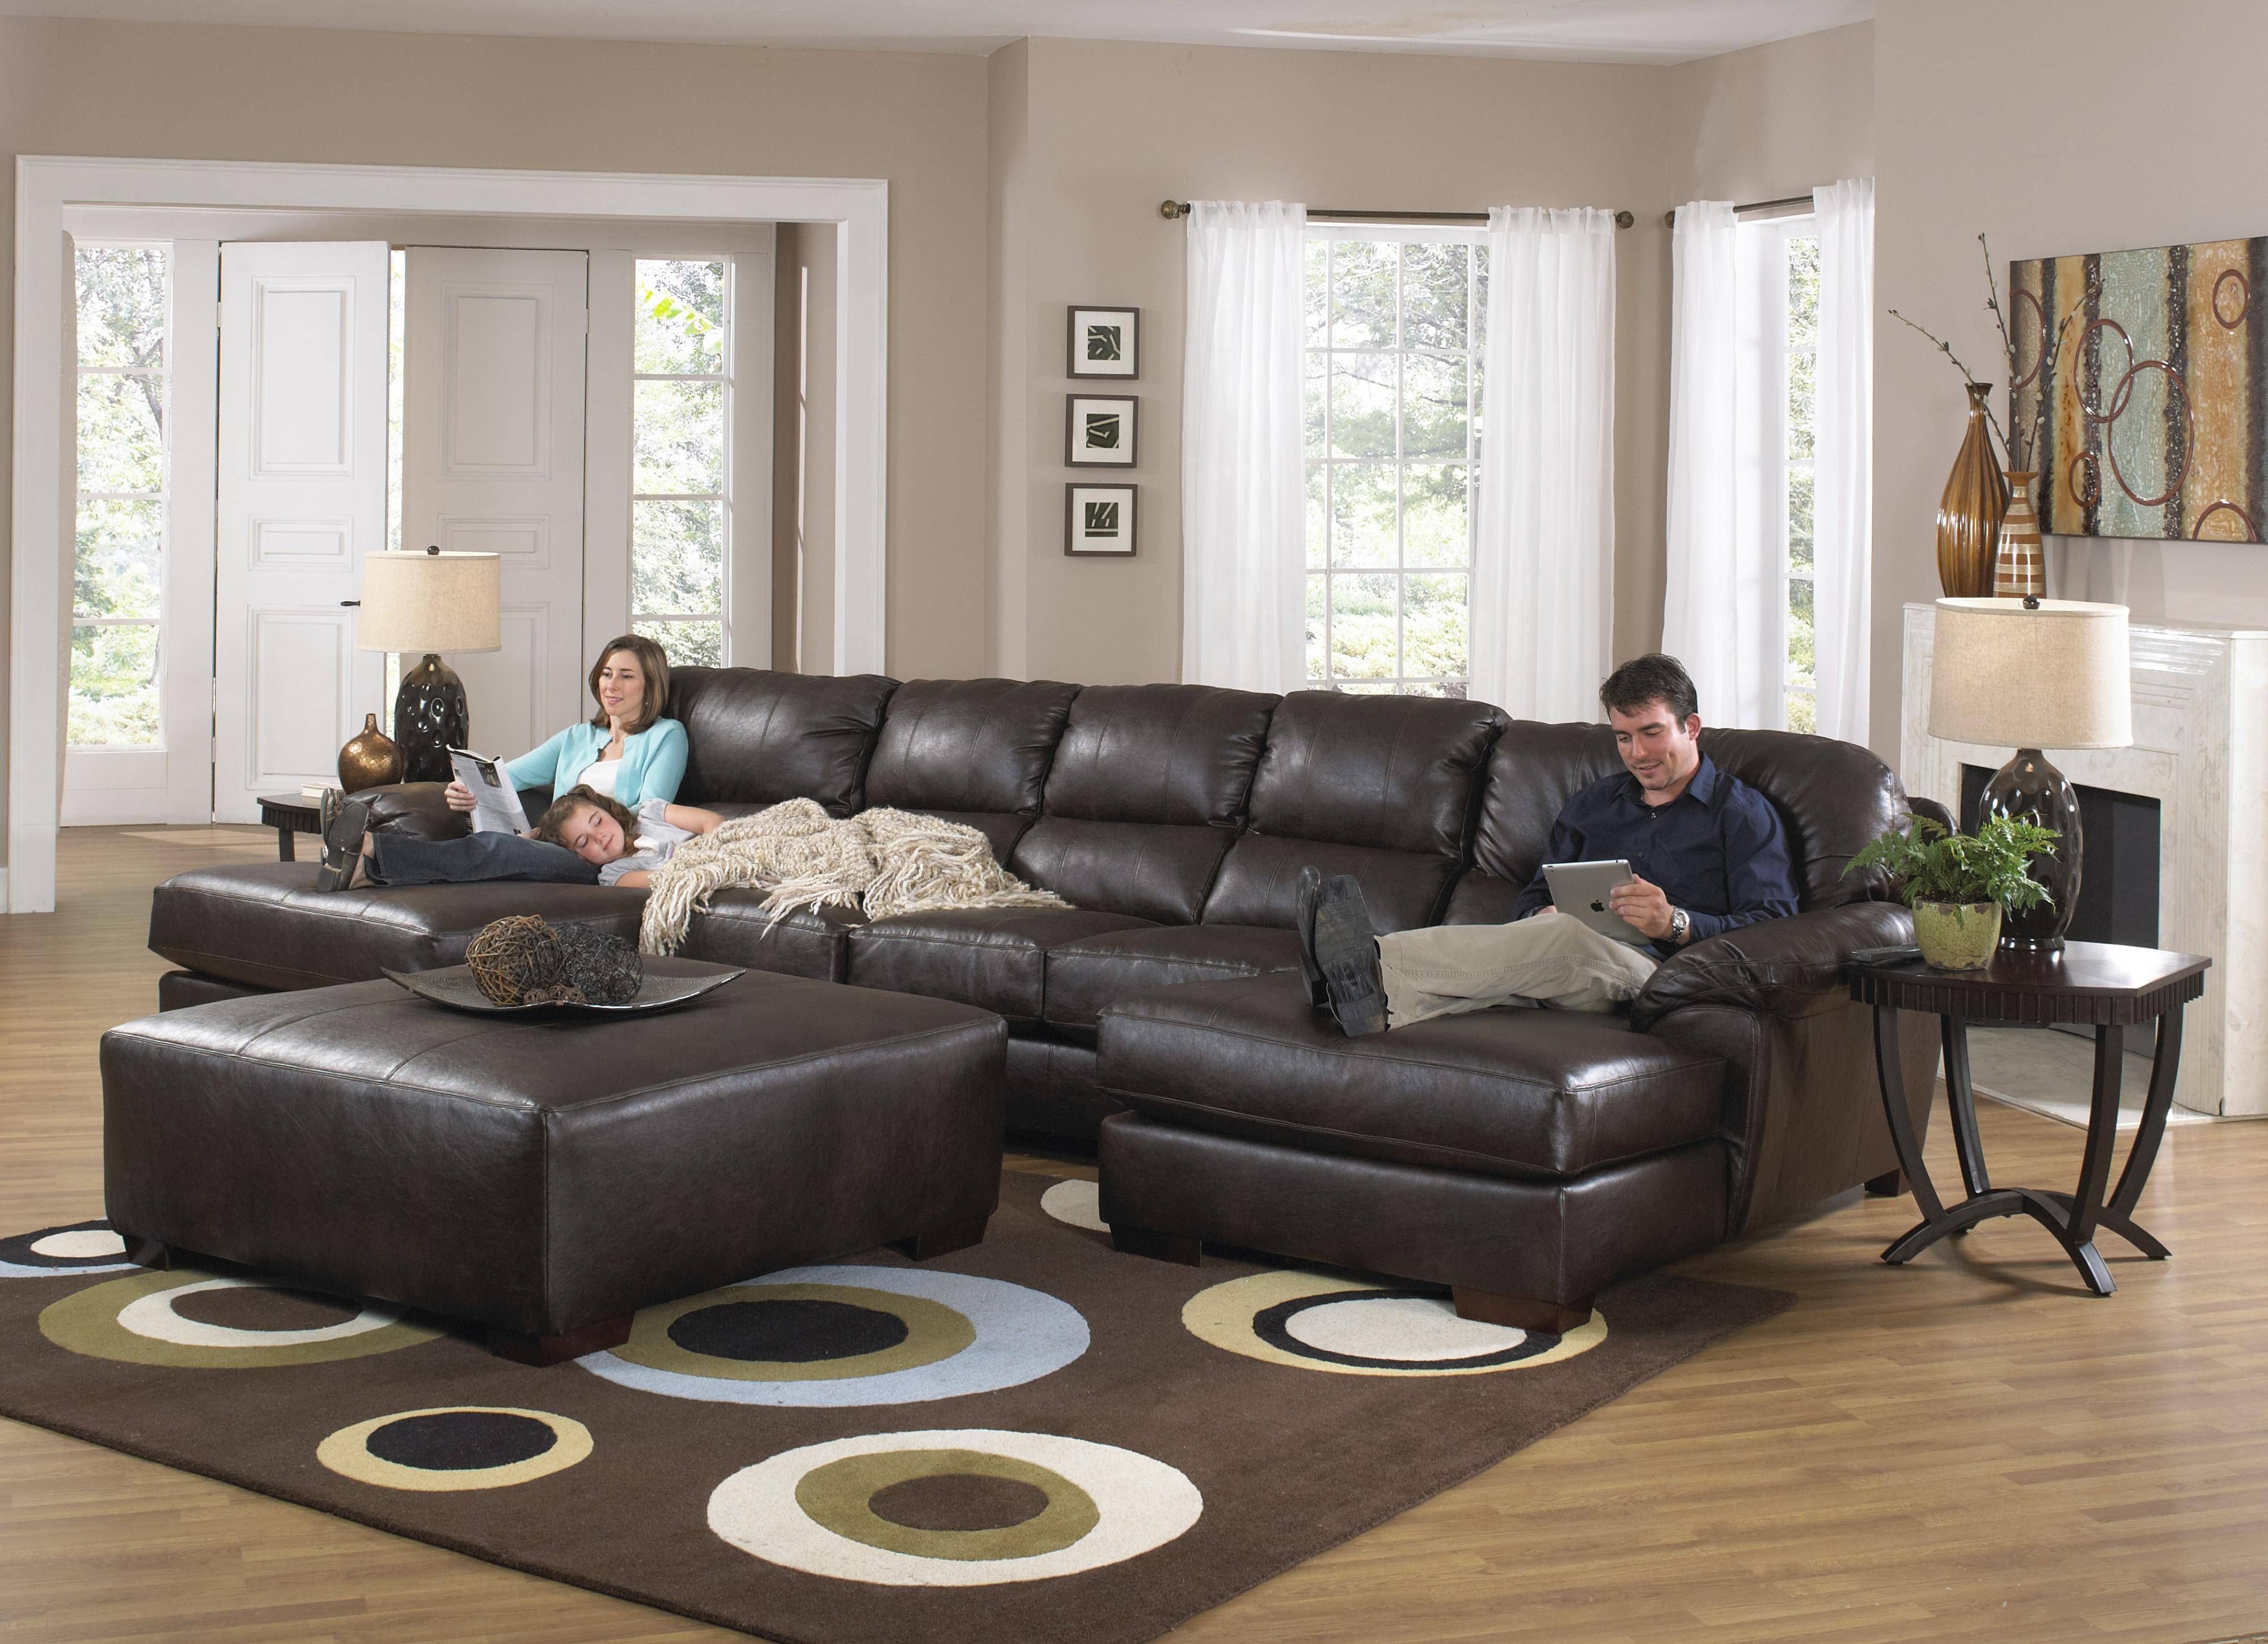 Dual Reclining Chaise Sofa | Centerfieldbar Regarding Sofas And Chaises Lounge Sets (Photo 14 of 15)